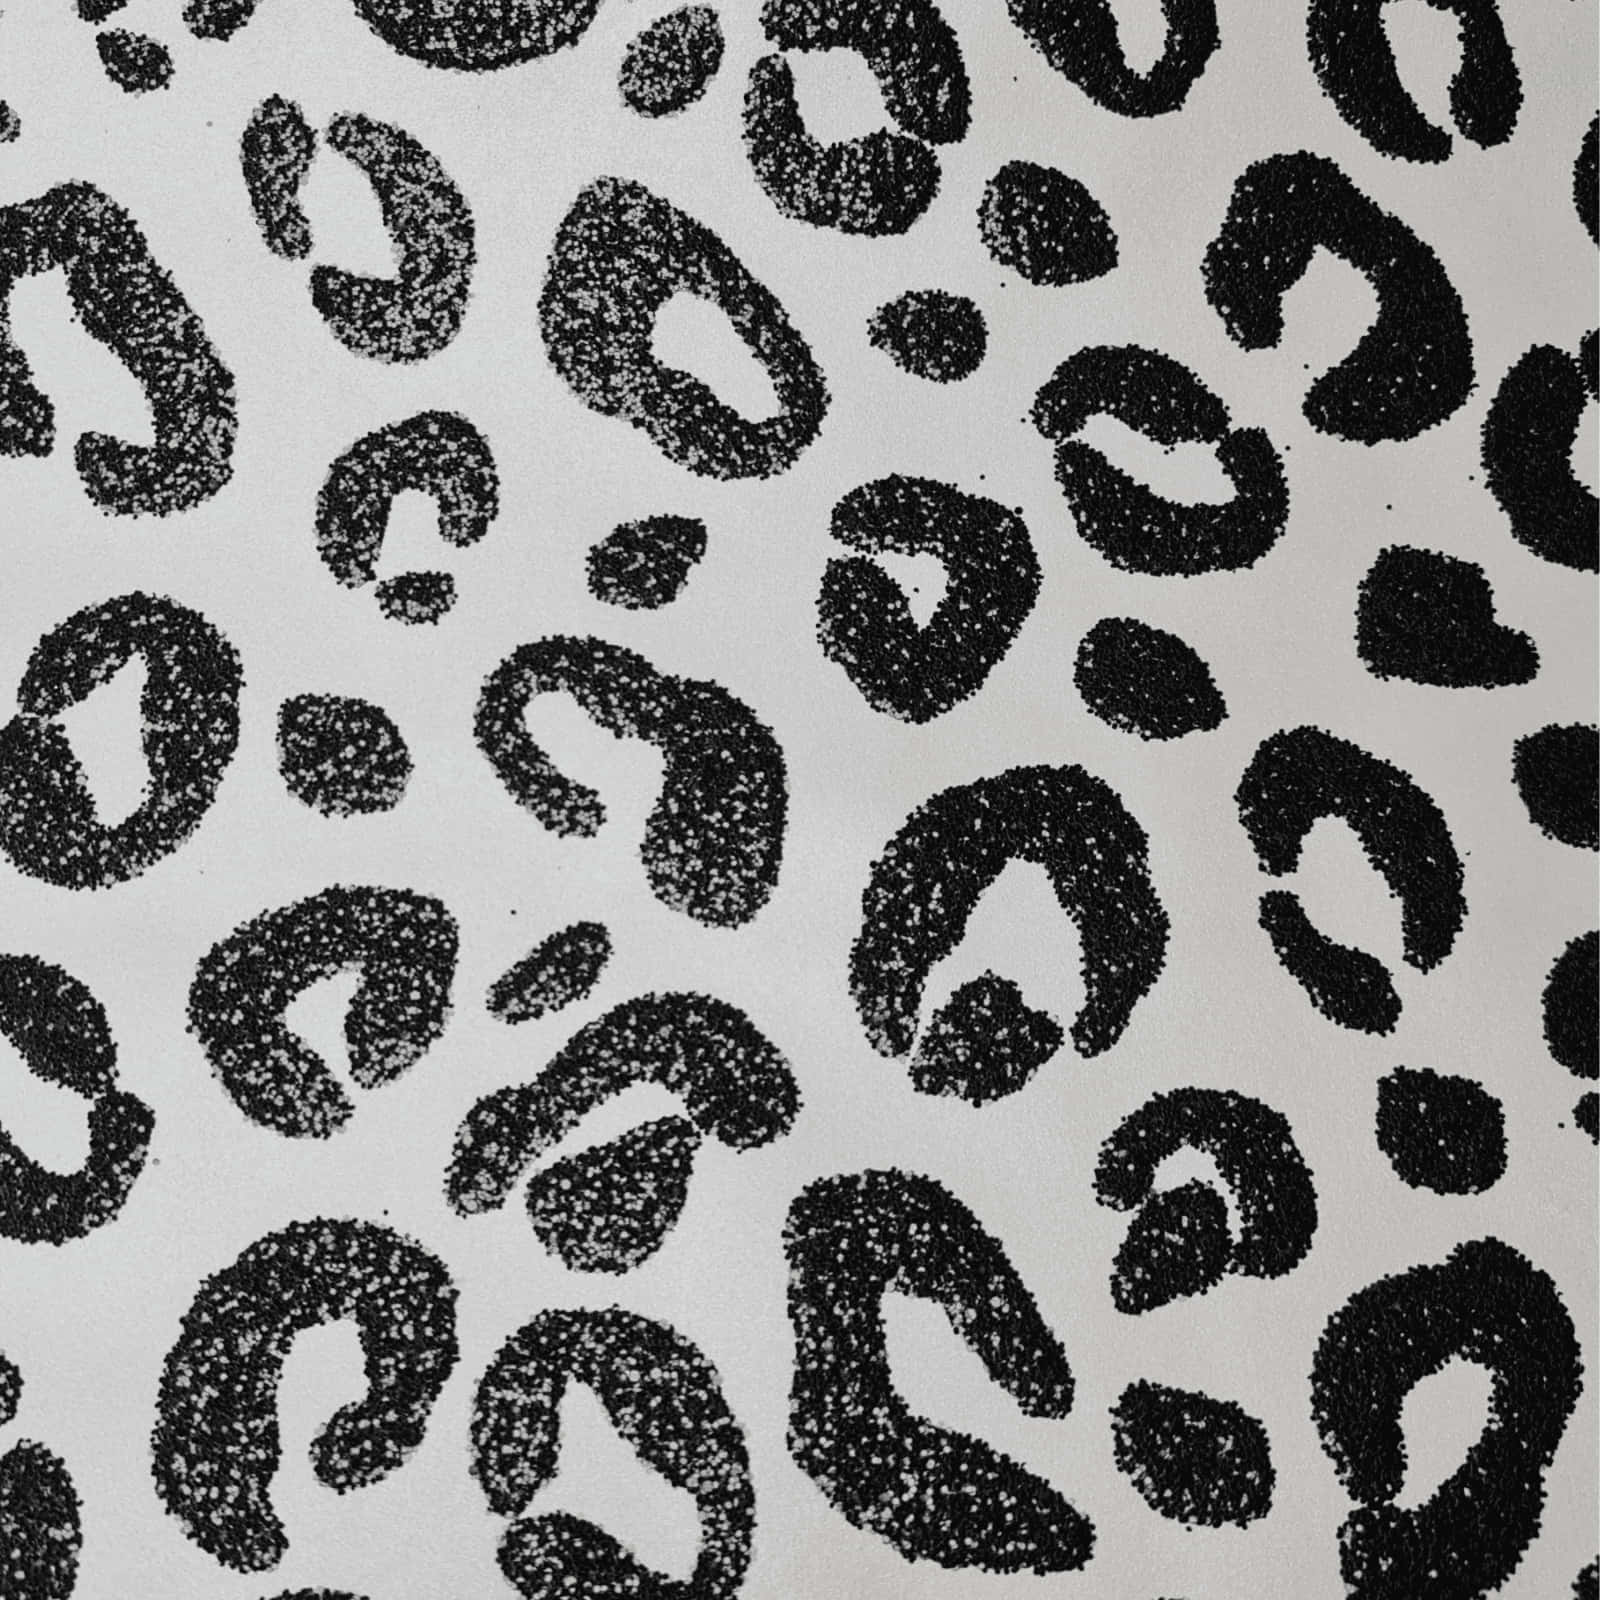 A Black And White Leopard Print Fabric Wallpaper